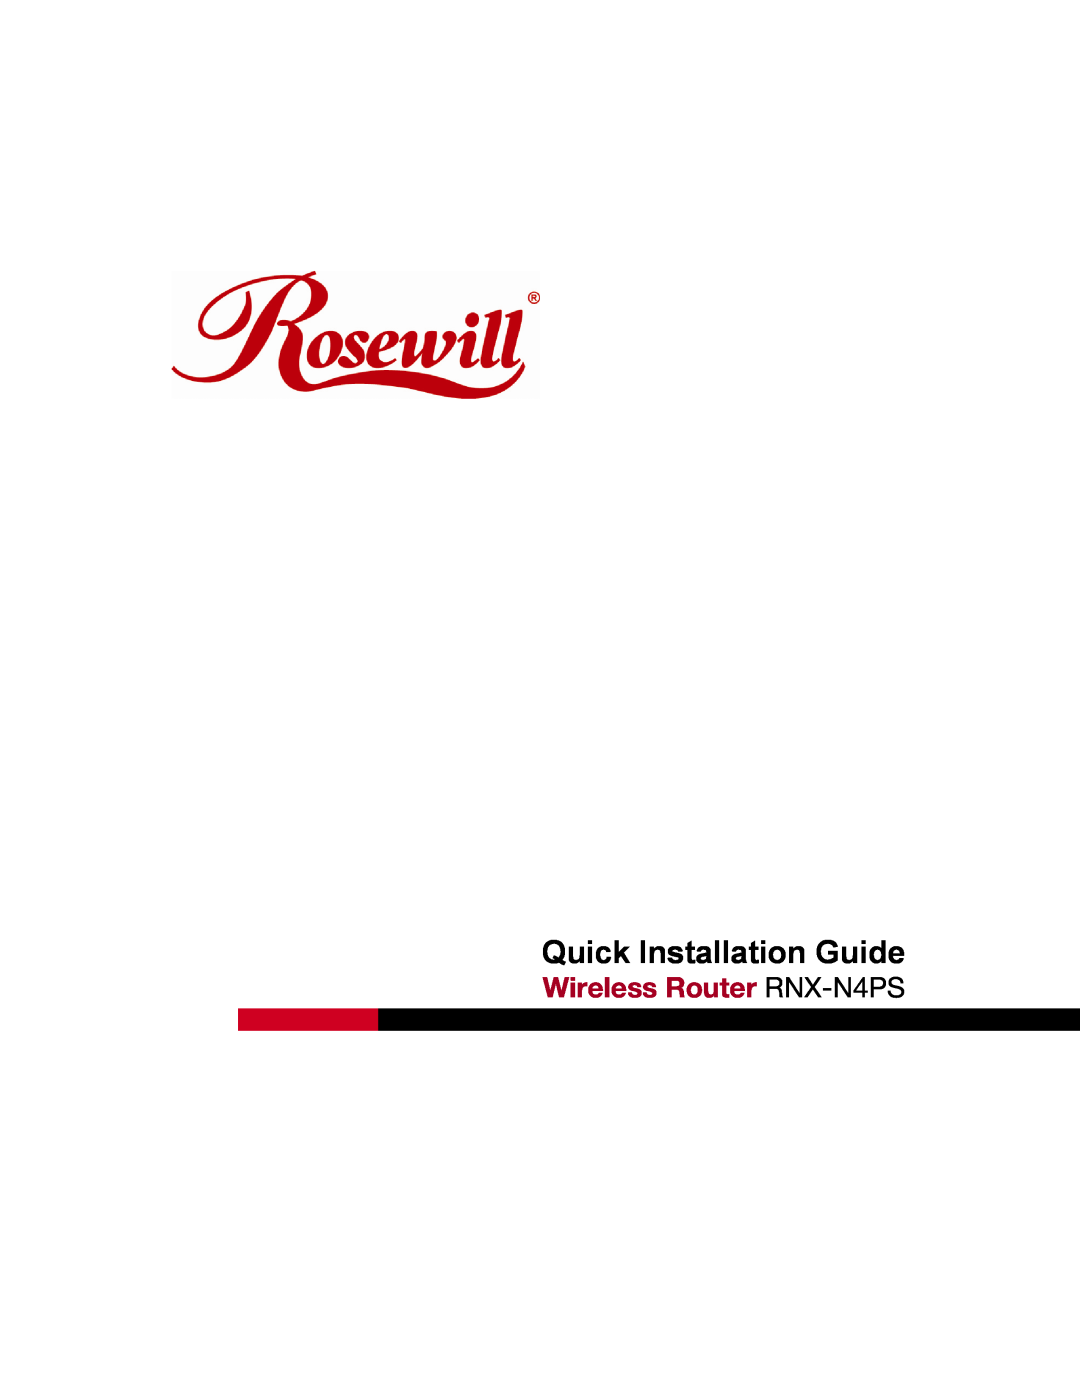 Rosewill manual Quick Installation Guide, Wireless Router RNX-N4PS 